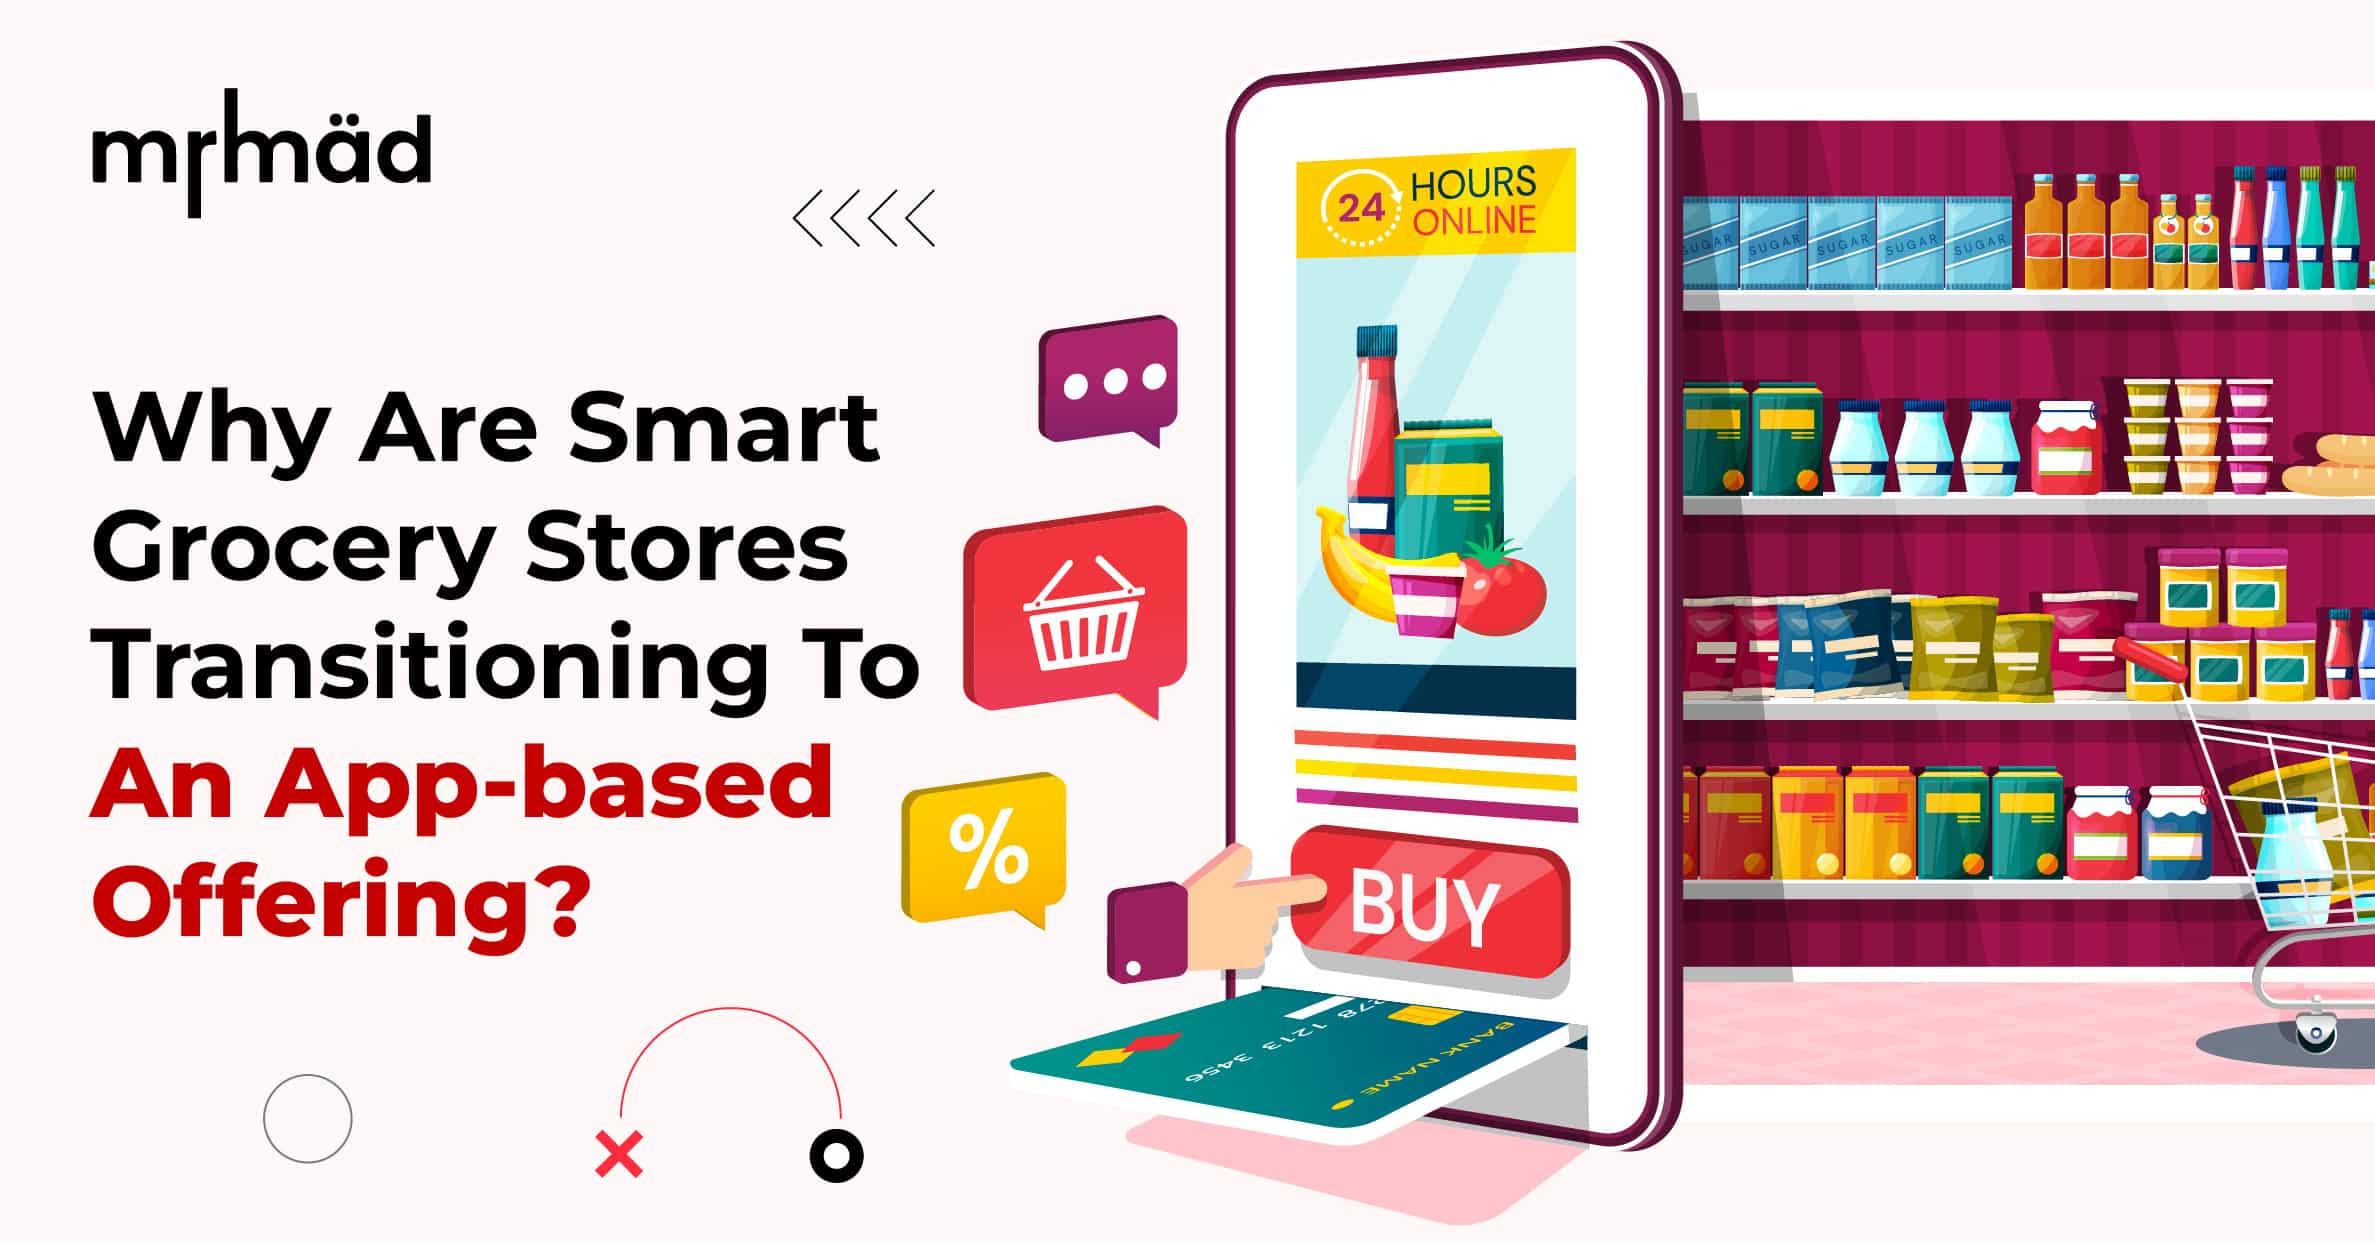 Why are smart grocery stores transitioning to an app-based offering